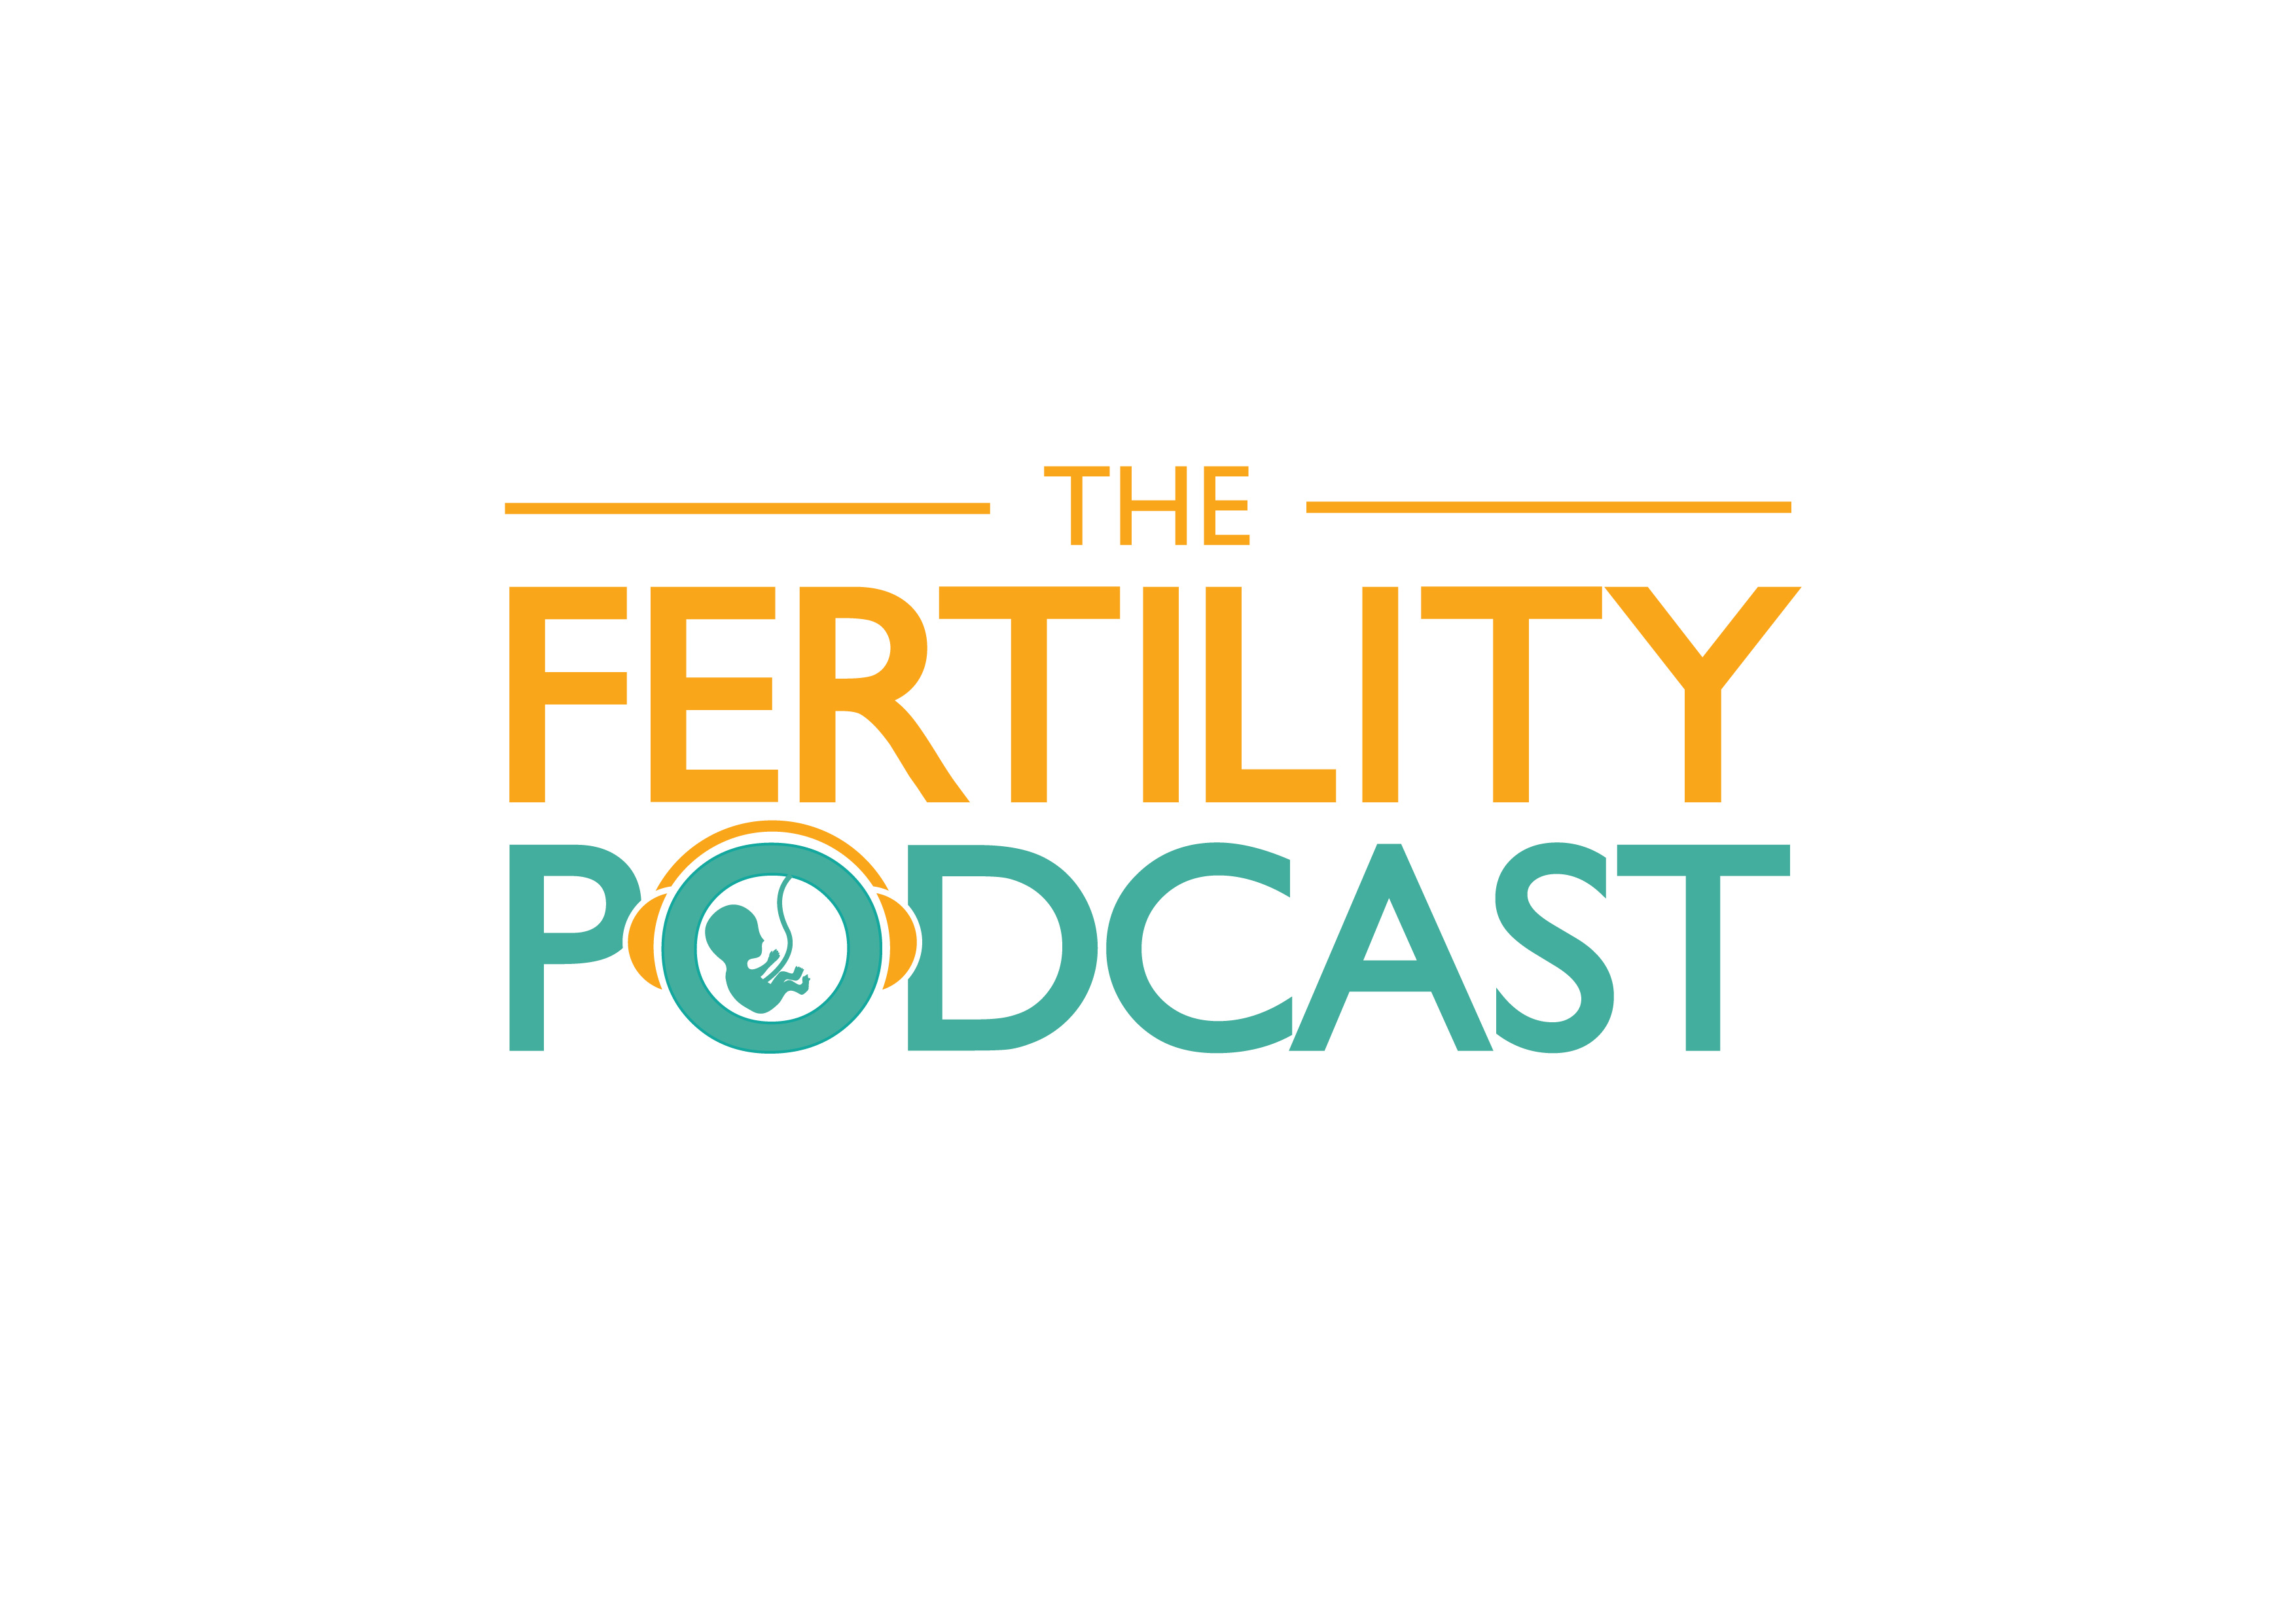 What is The Fertility Podcast all about